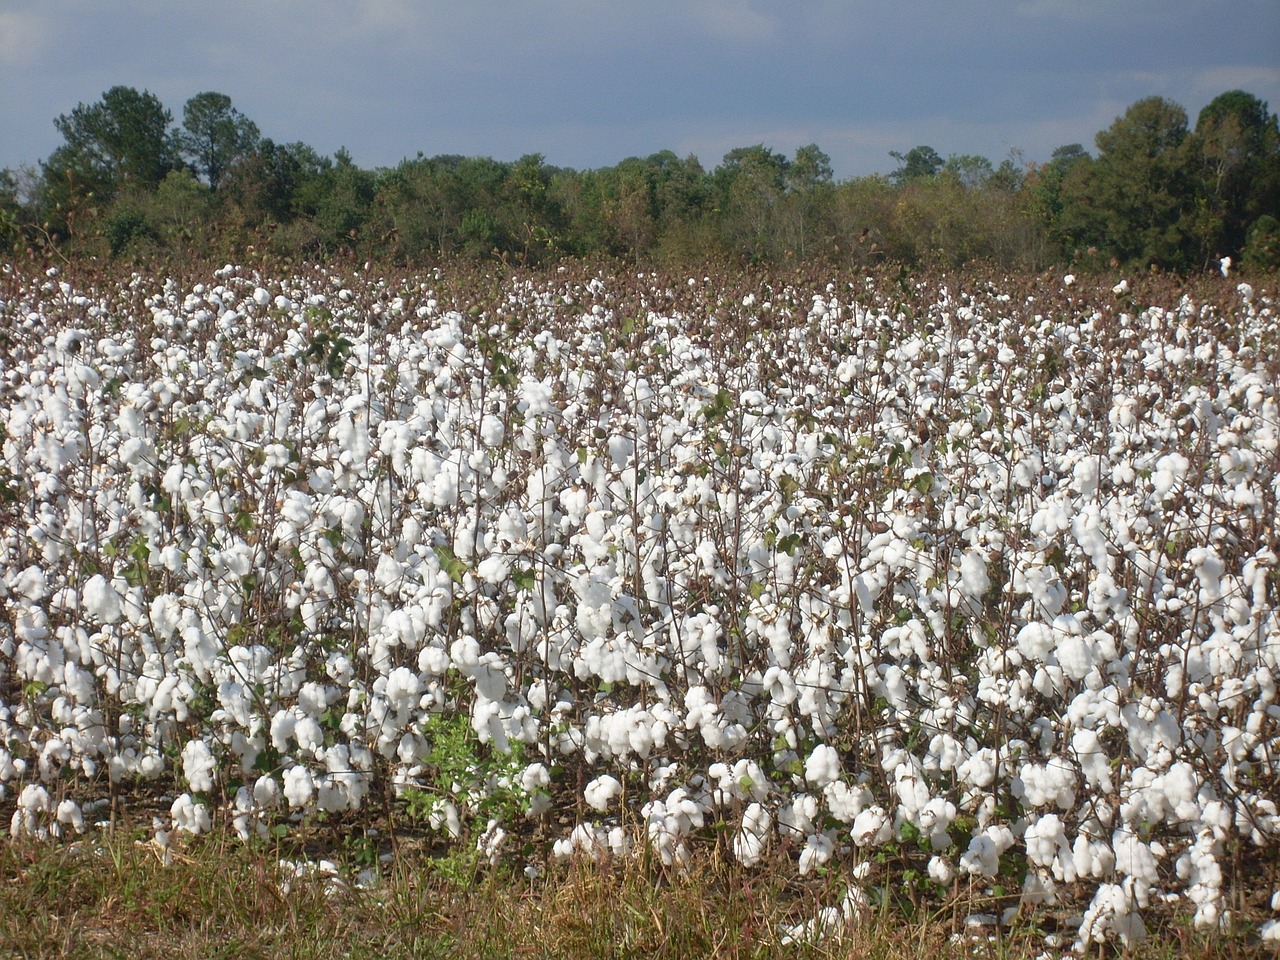 Cotton field with trees in background by valdosta from Pixabay